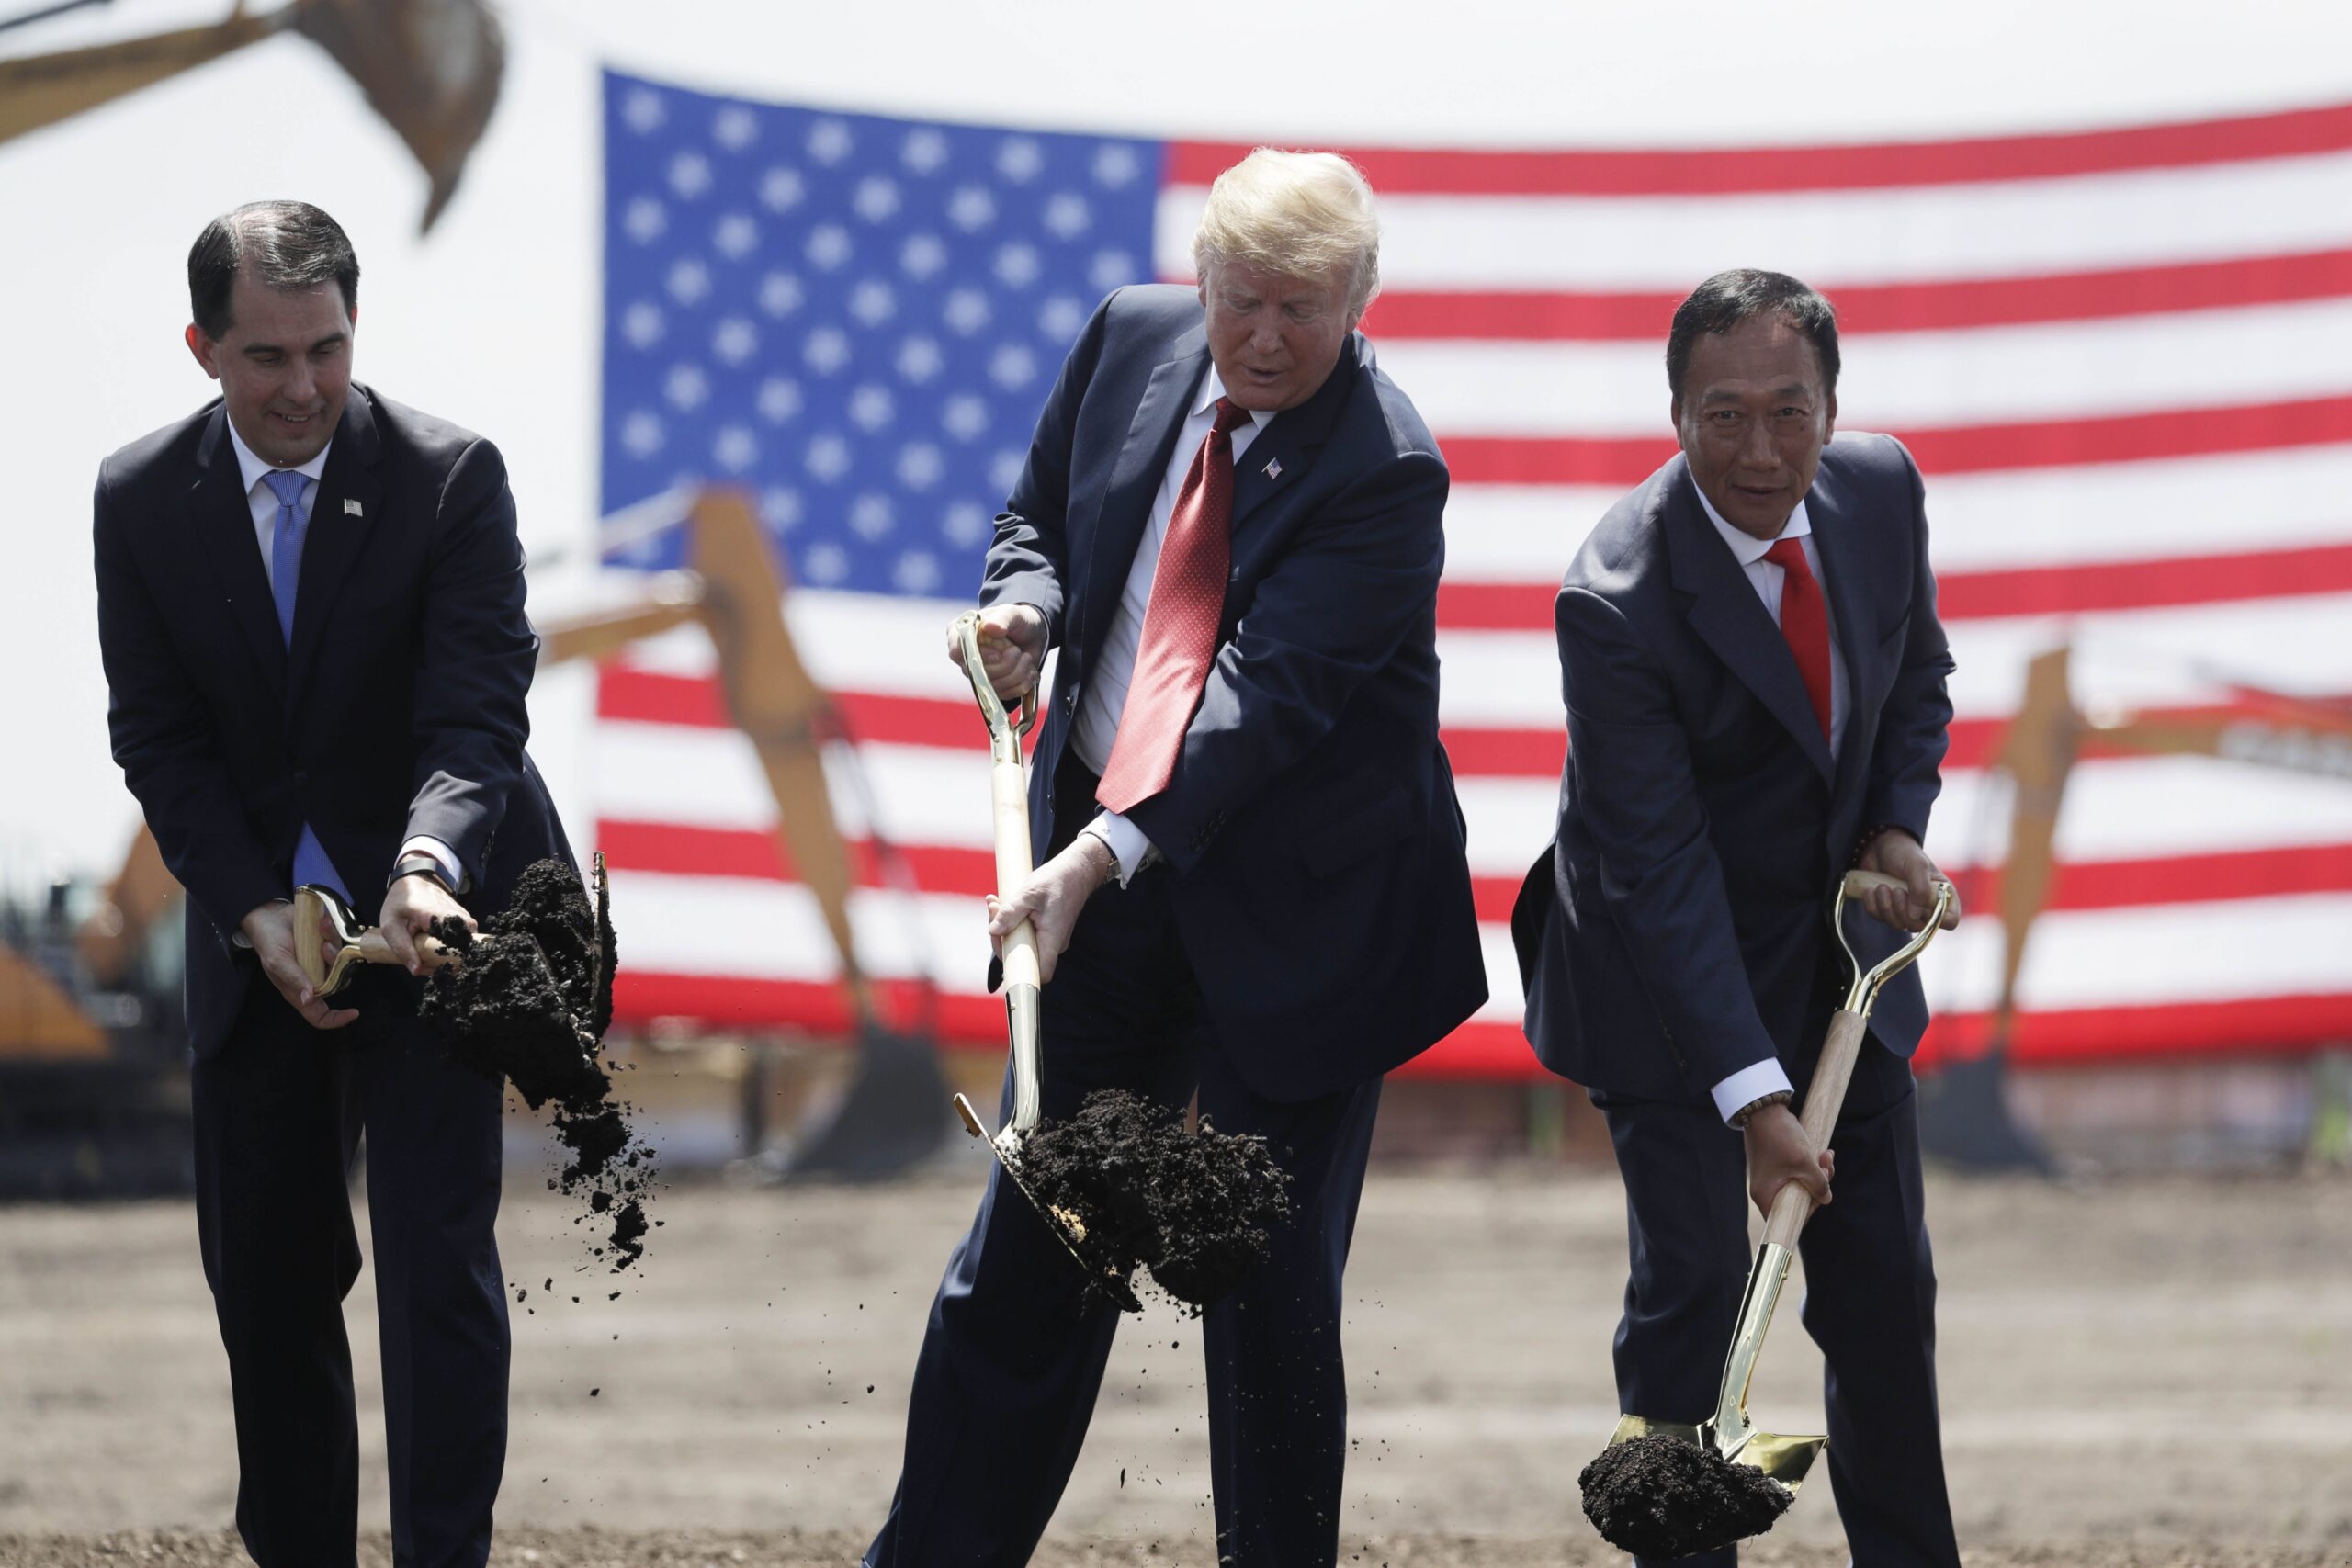 Trump Comes To Wisconsin For Foxconn Groundbreaking With Walker, Protesters In Tow